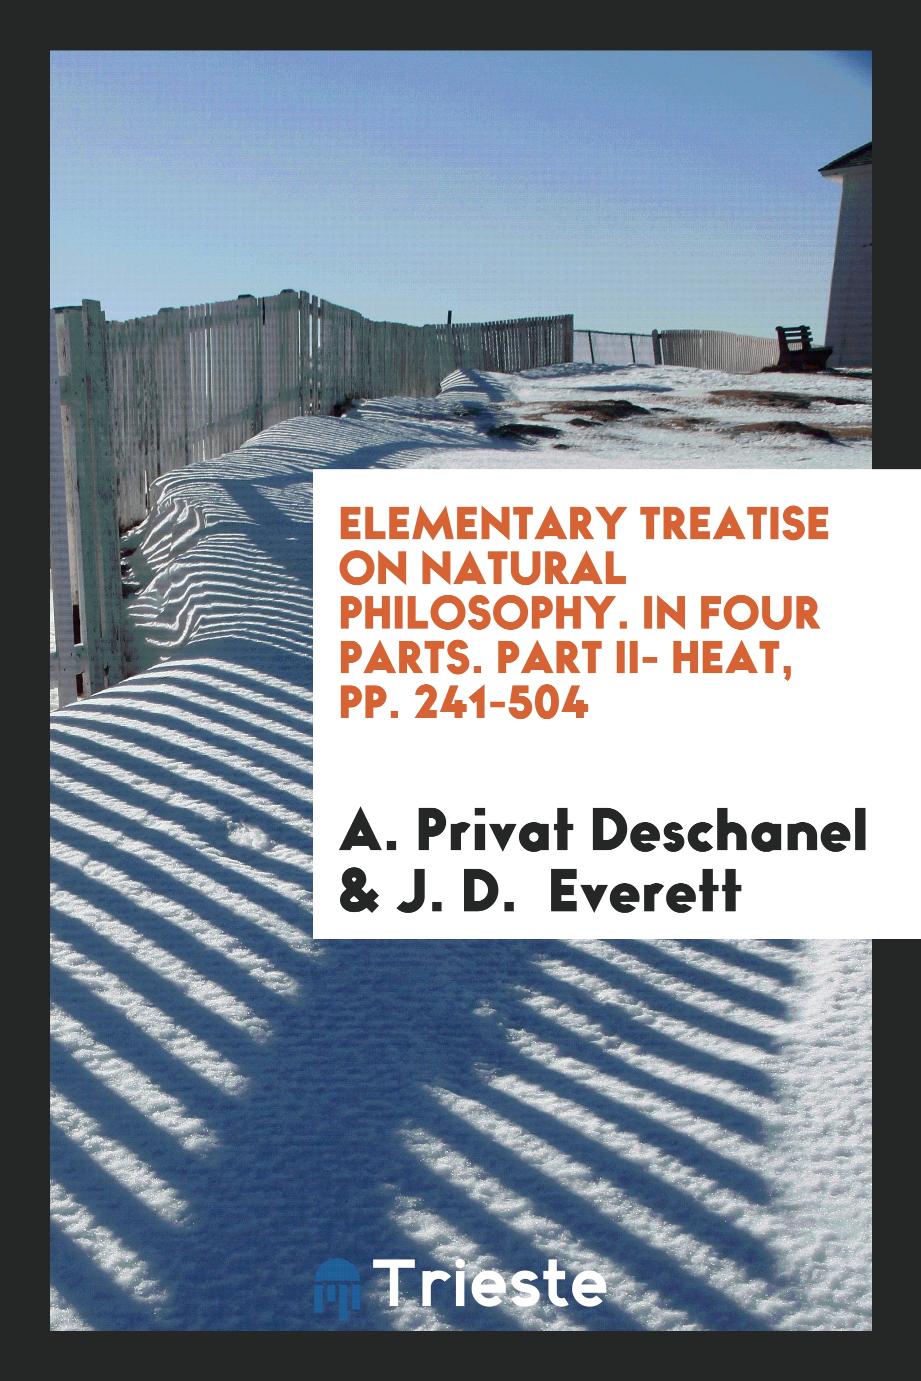 A. Privat Deschanel, J. D. Everett - Elementary Treatise on Natural Philosophy. In Four Parts. Part II- Heat, pp. 241-504